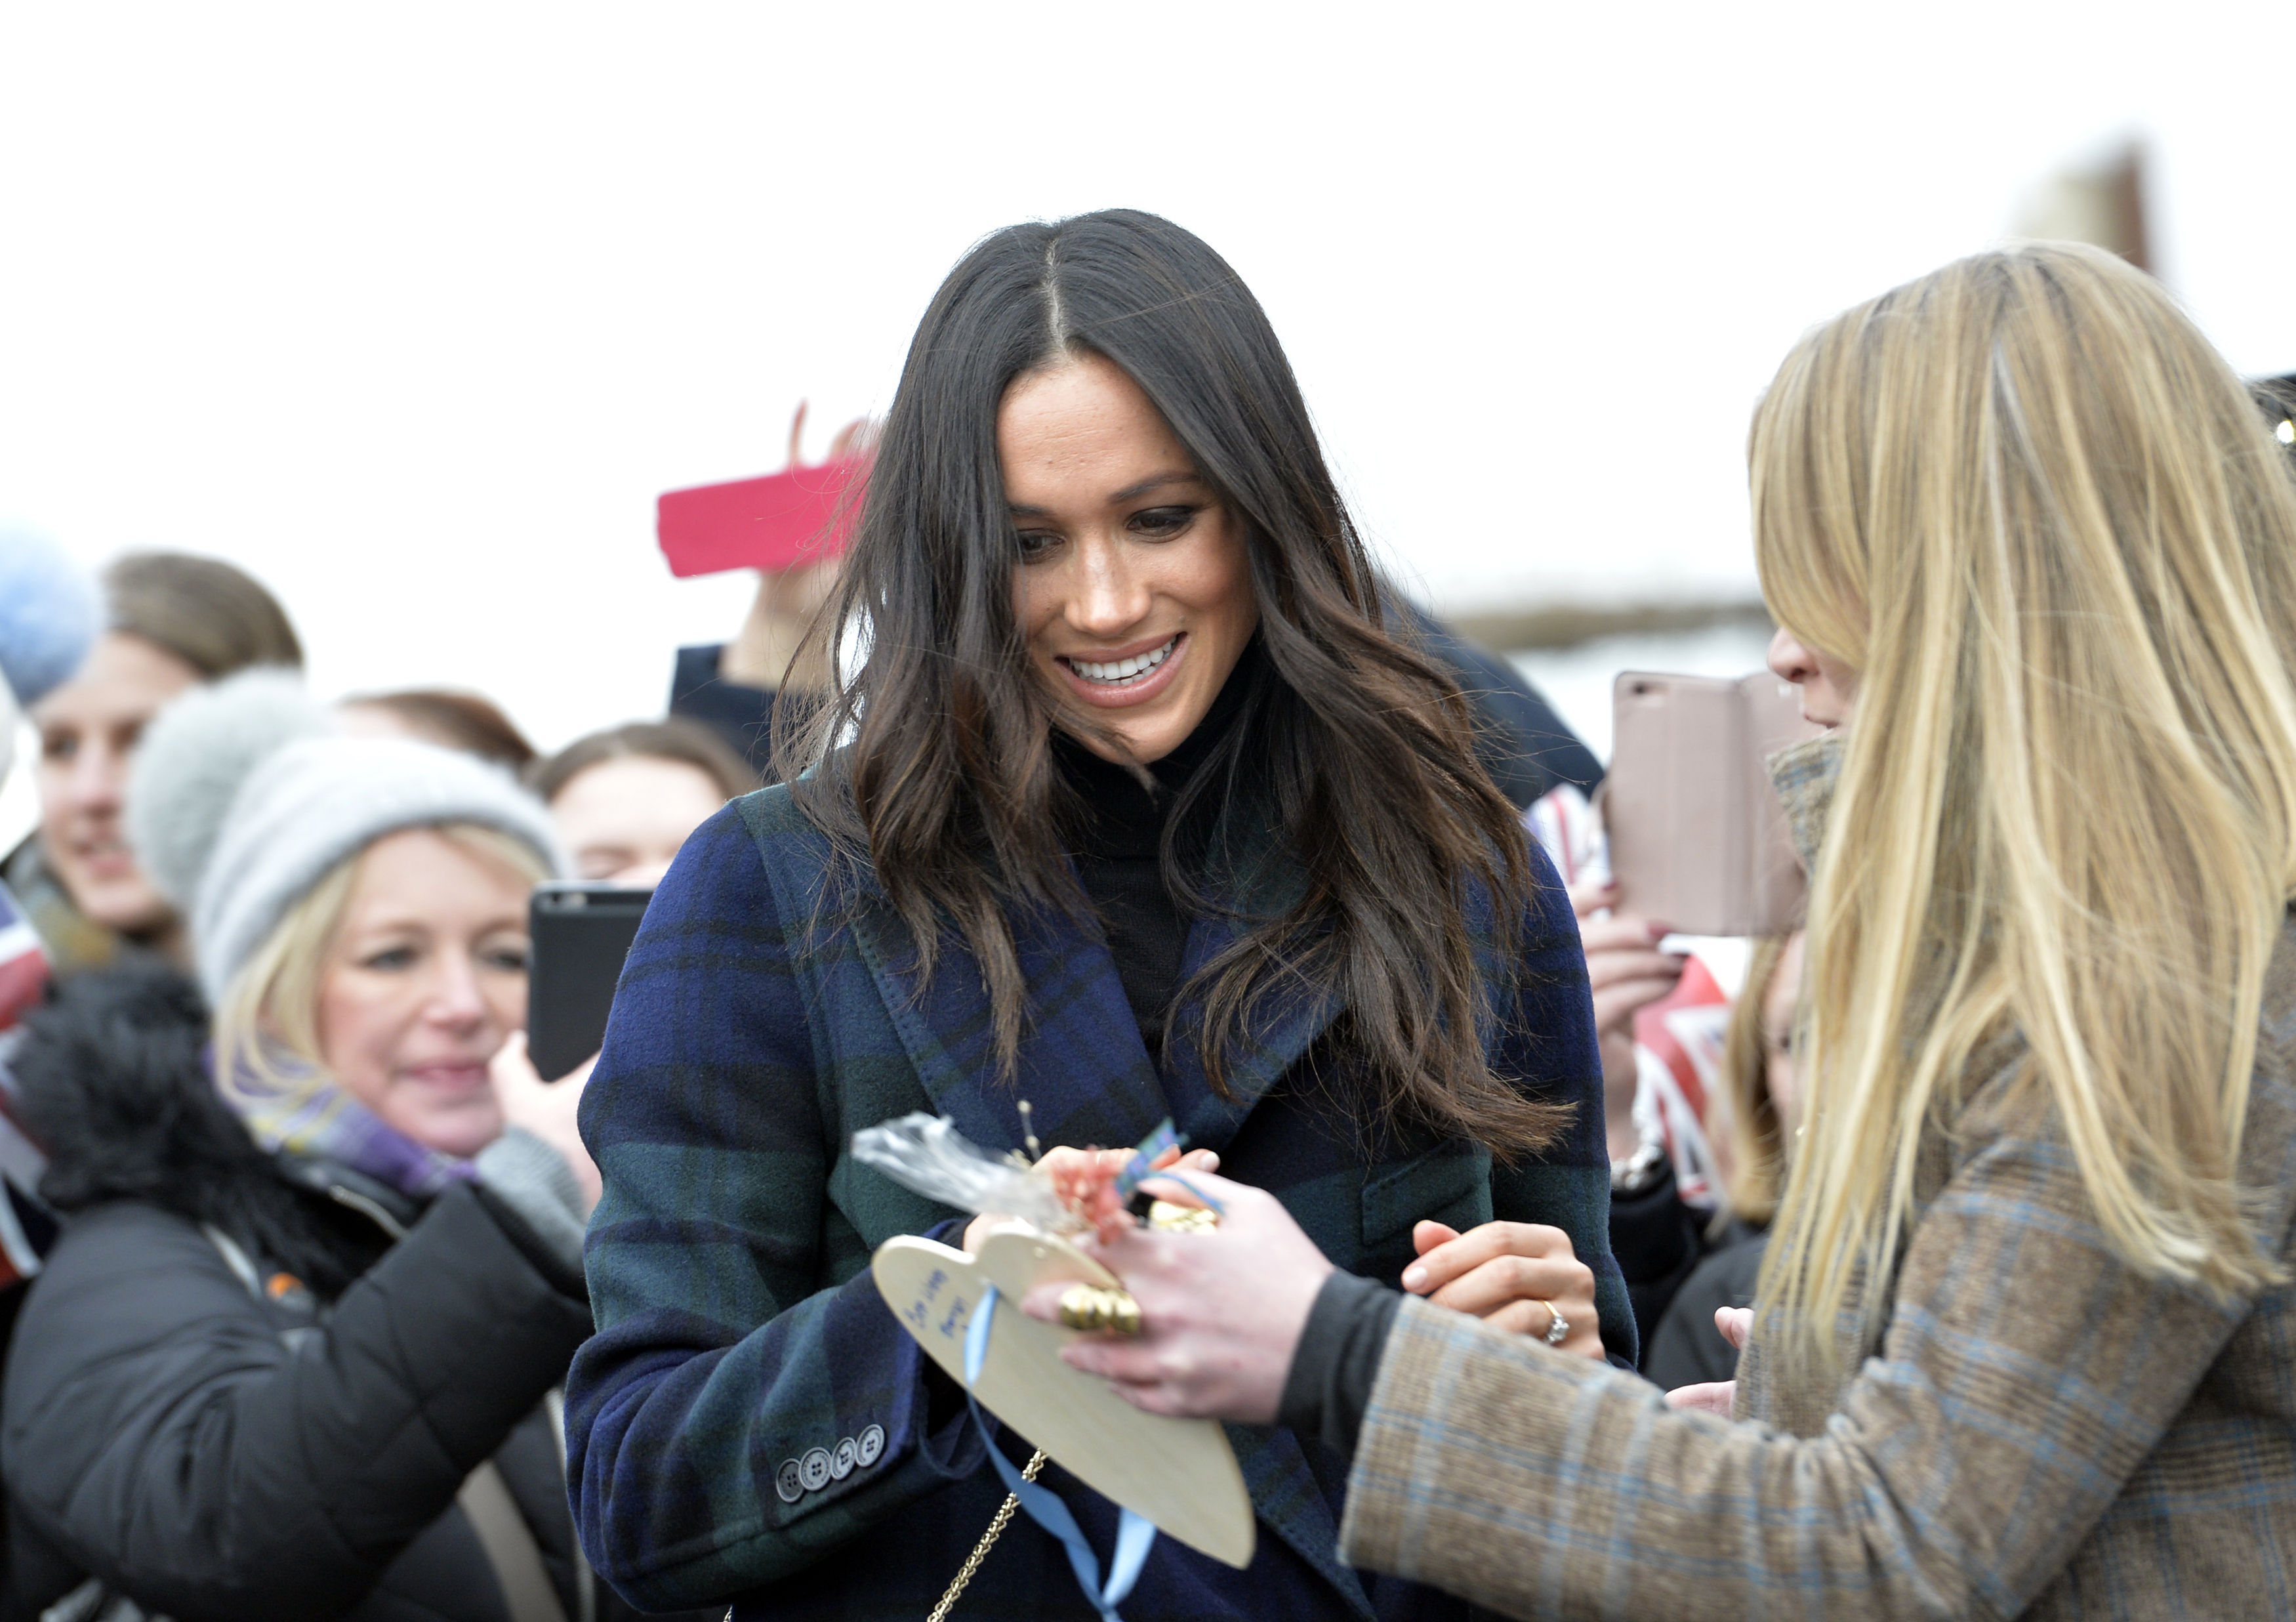 Onlookers presented gifts to Meghan Markle during her walkabout (John Linton/PA)